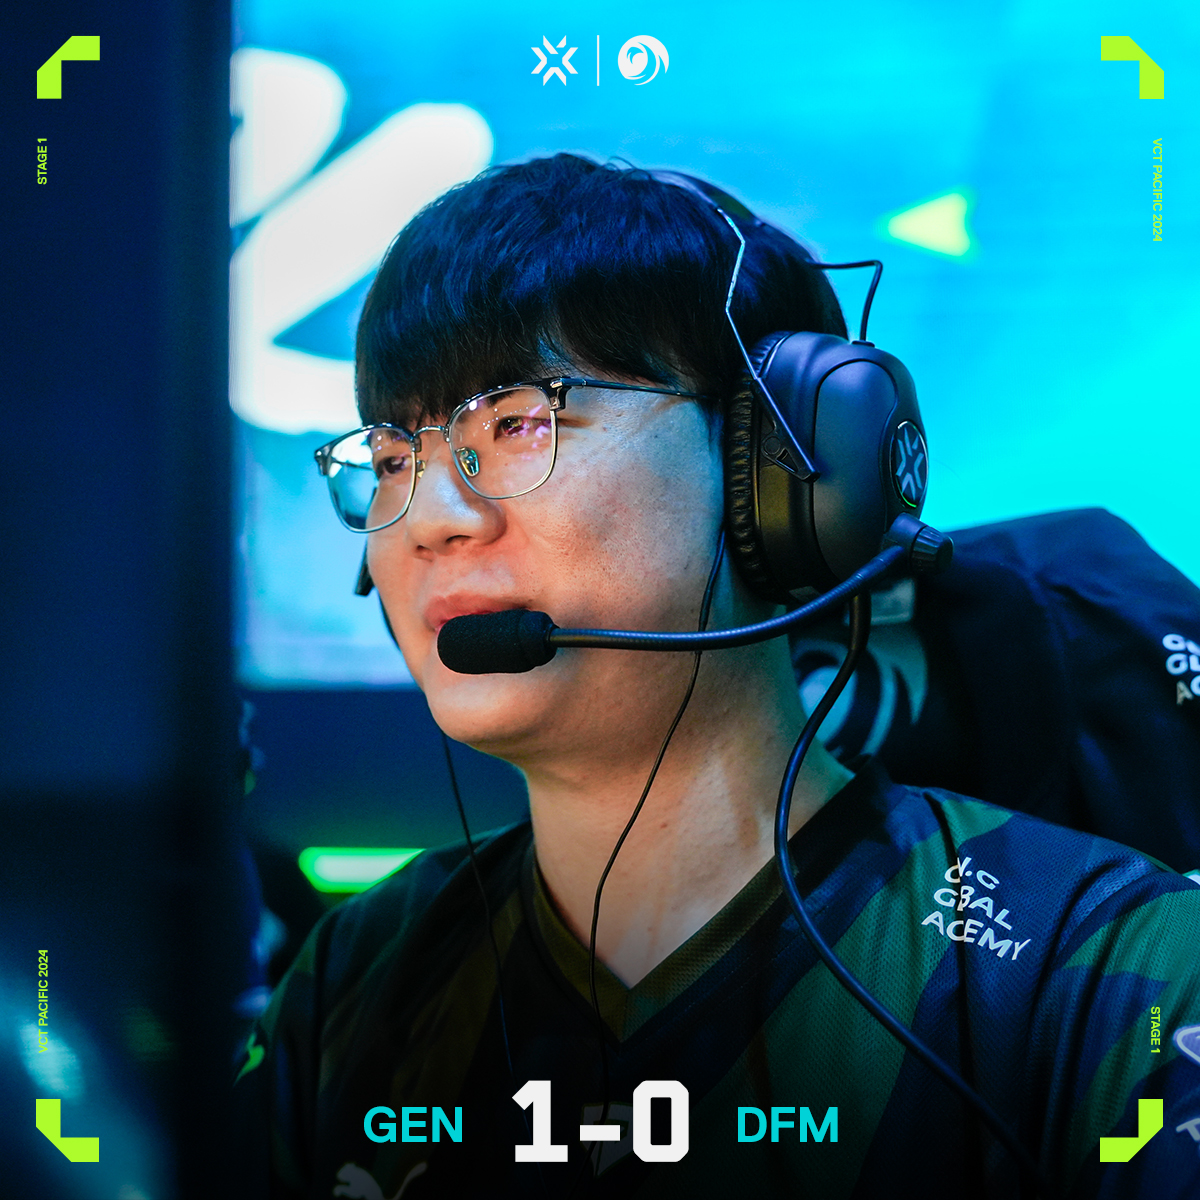 .@geng_gold takes the lead after a strong performance in Split! Coming right up, we're heading to Lotus! #VCTPacific